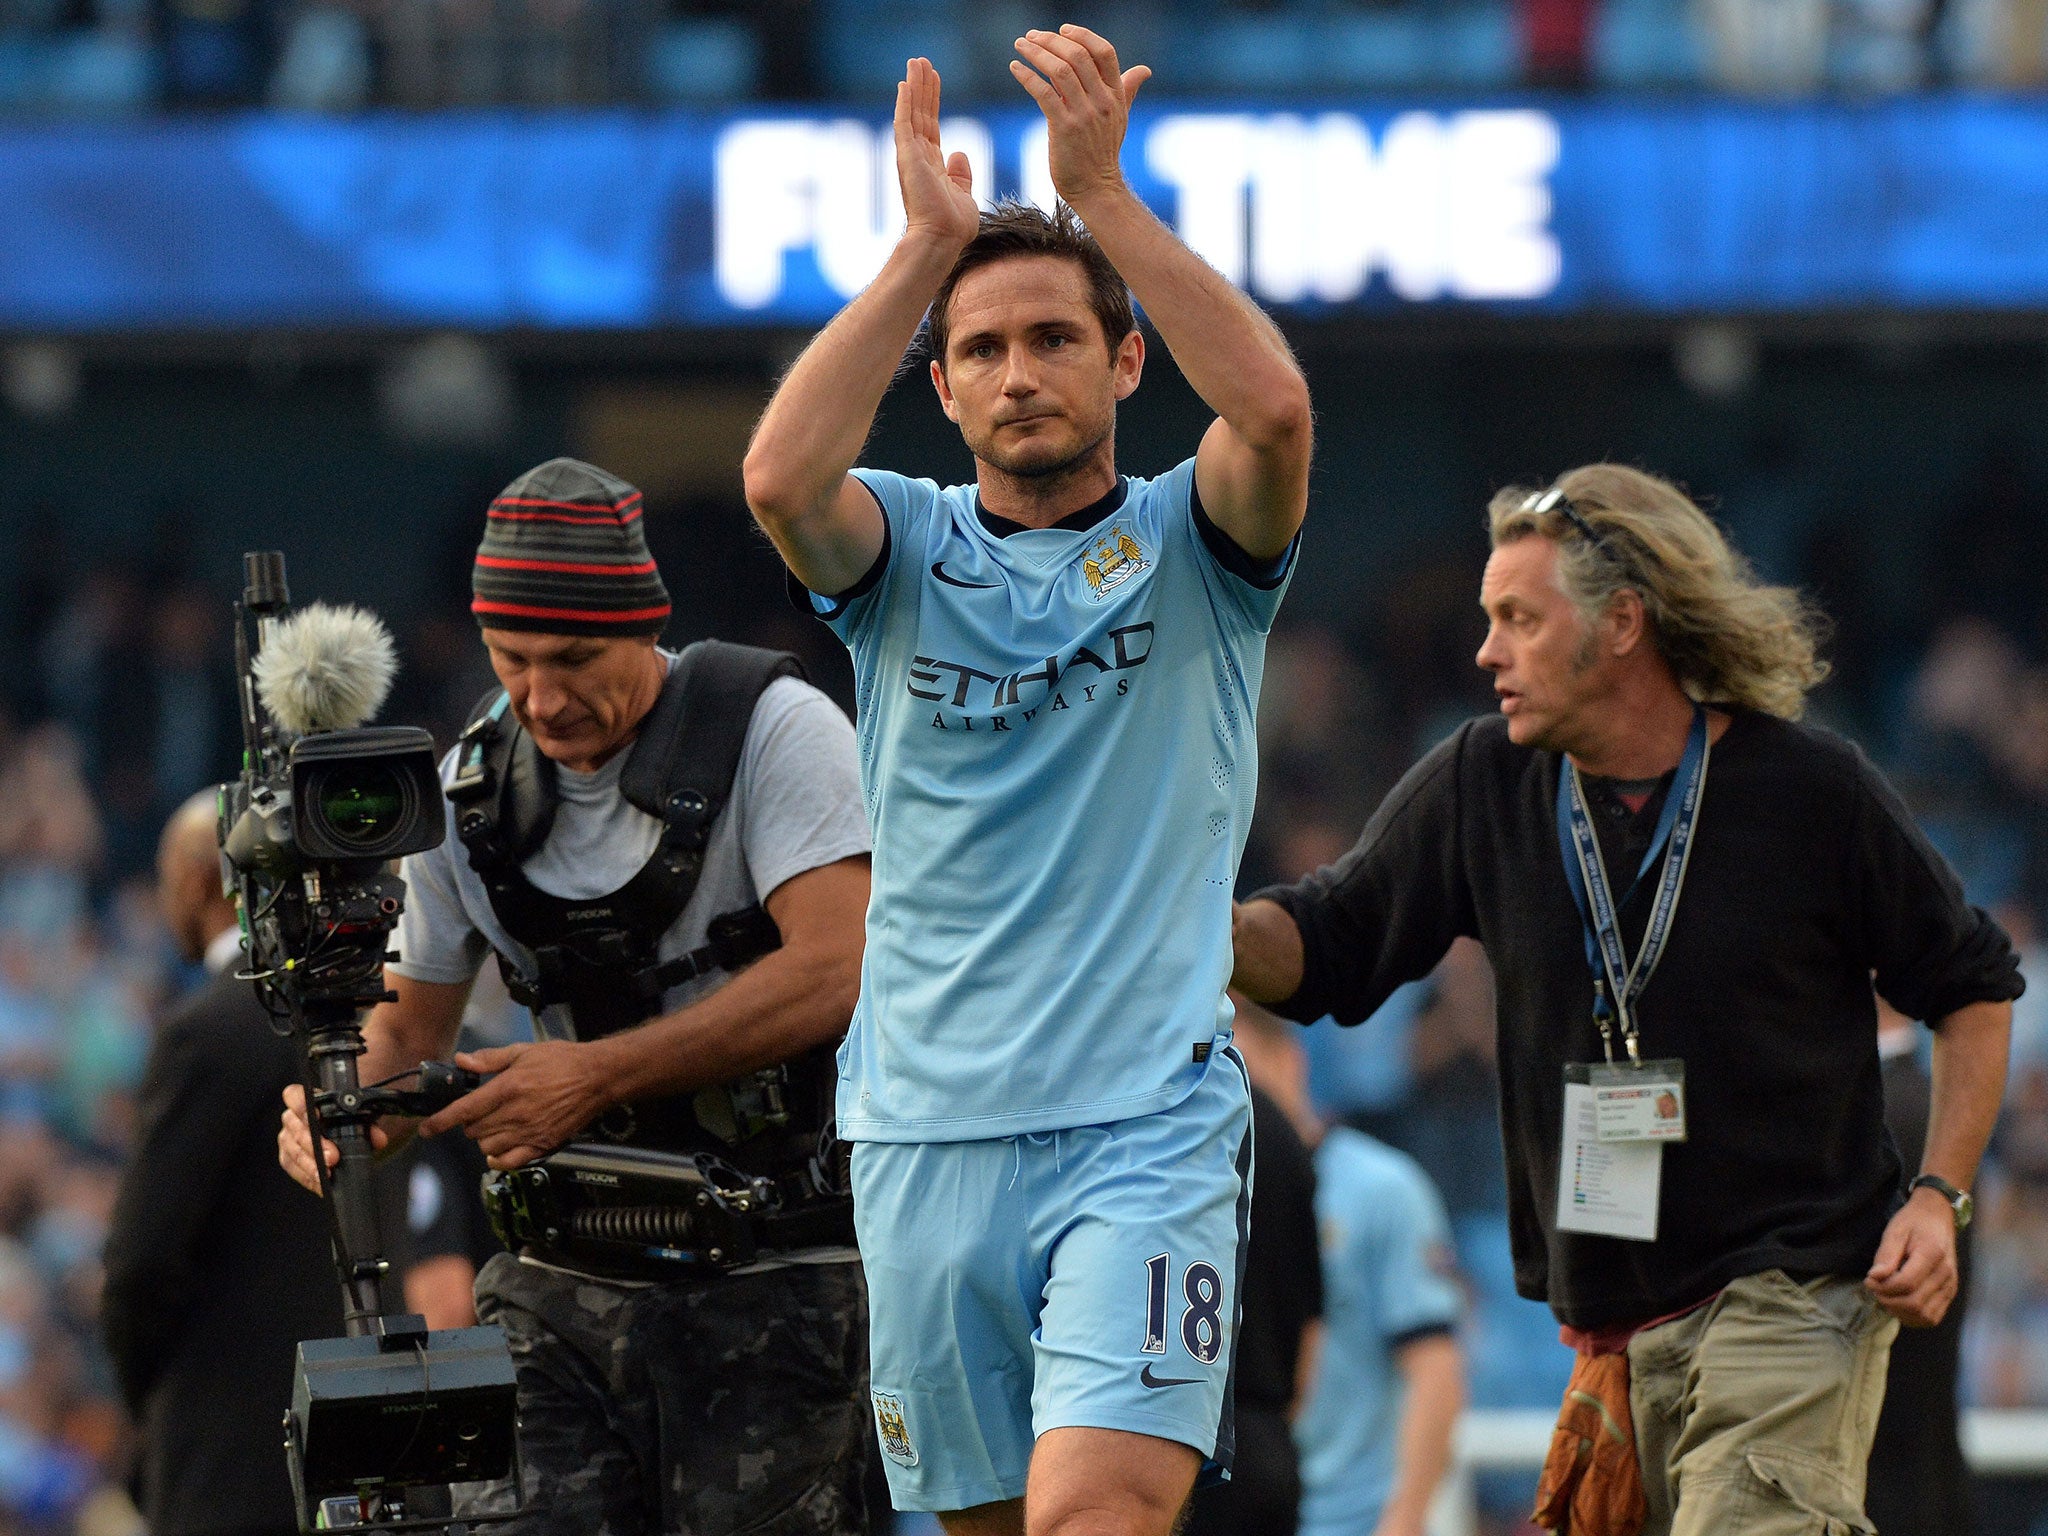 Frank Lampard applauds the Chelsea fans after scoring against them last week